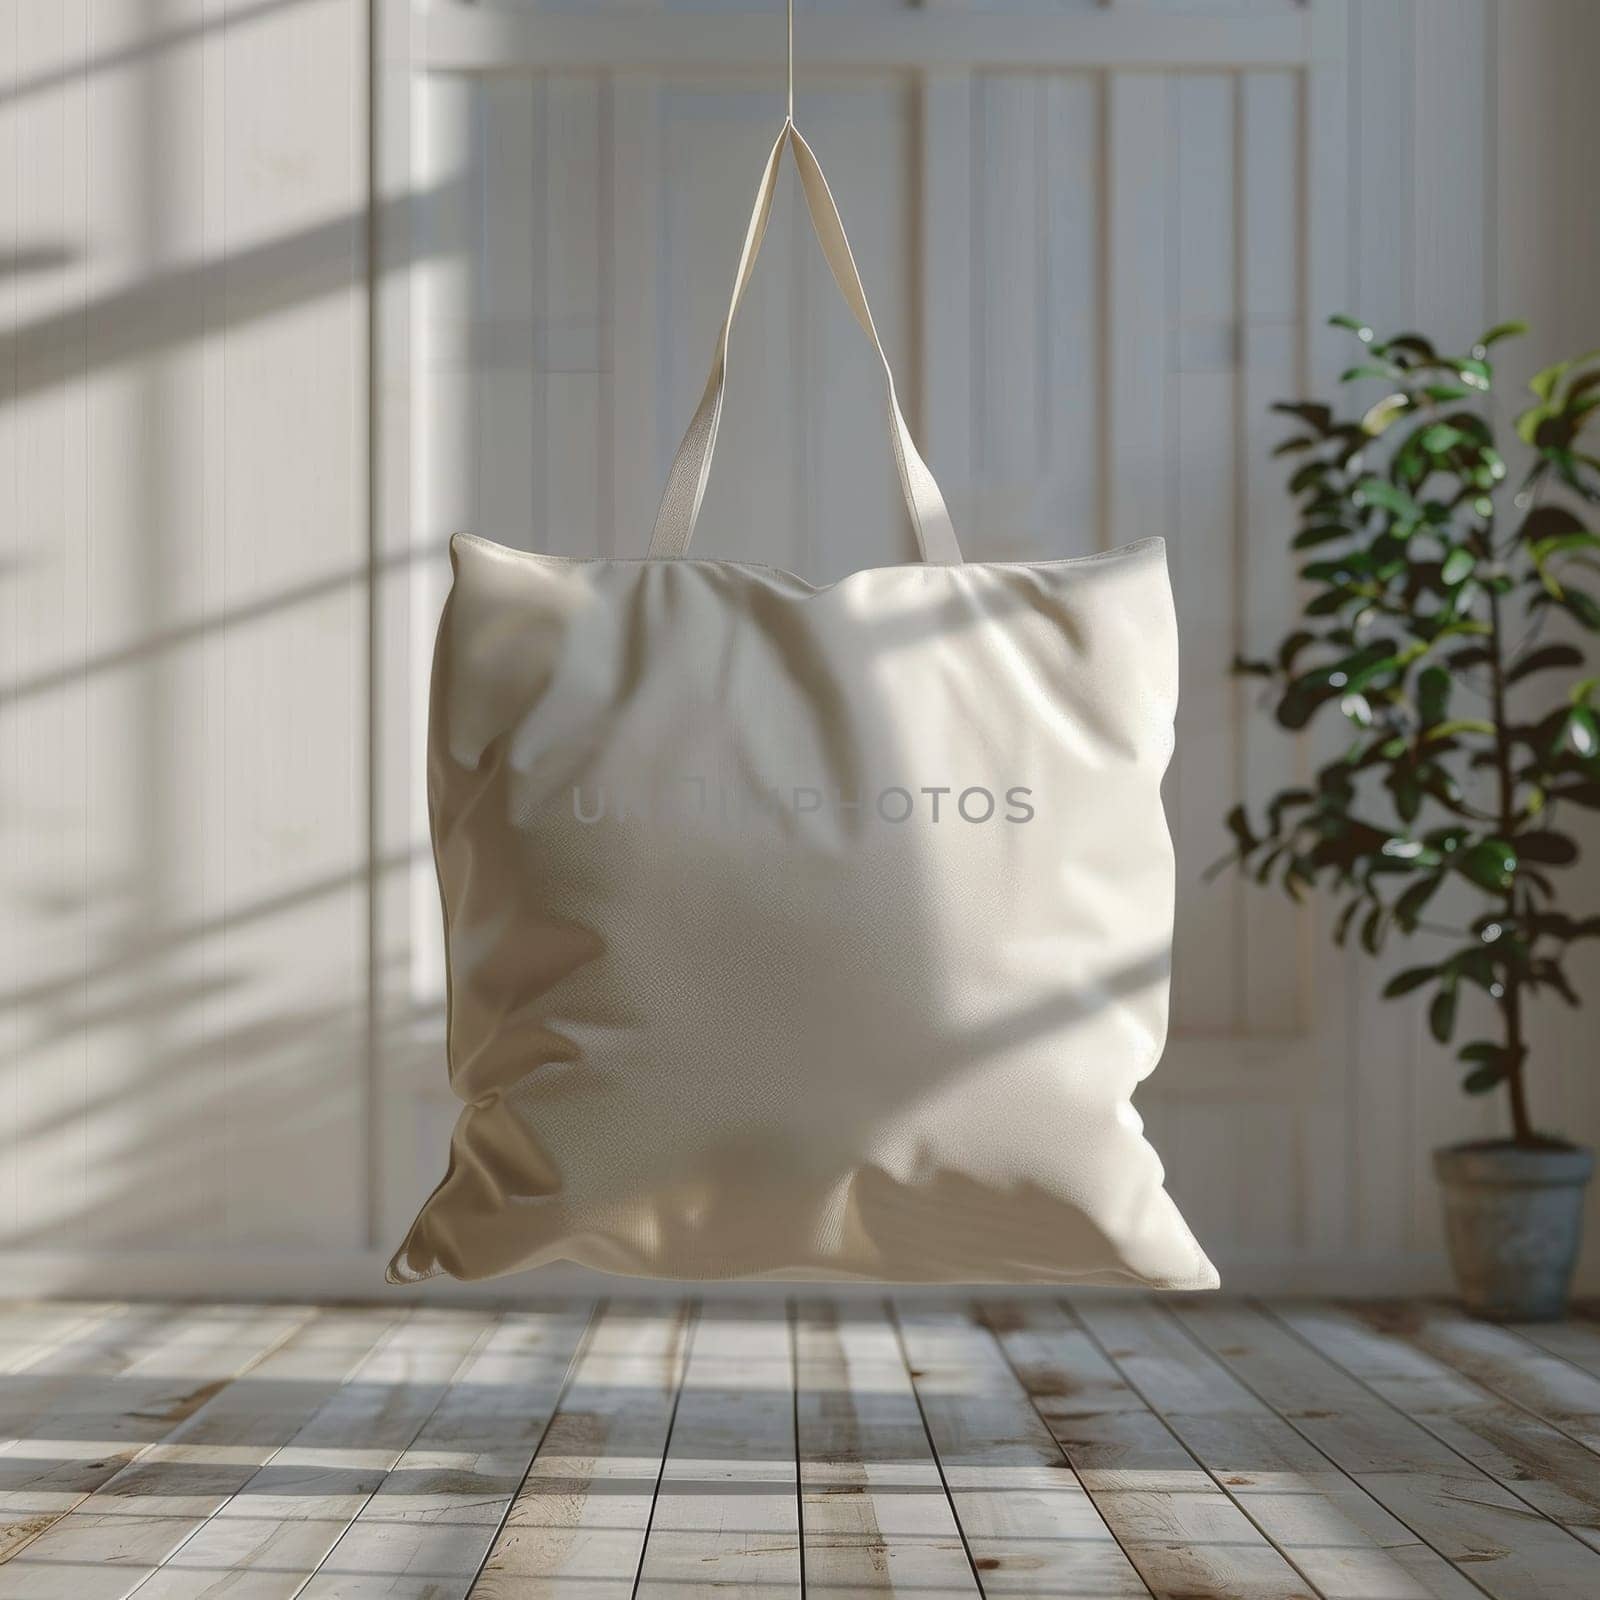 A white tote bag is hanging from a window sill by itchaznong